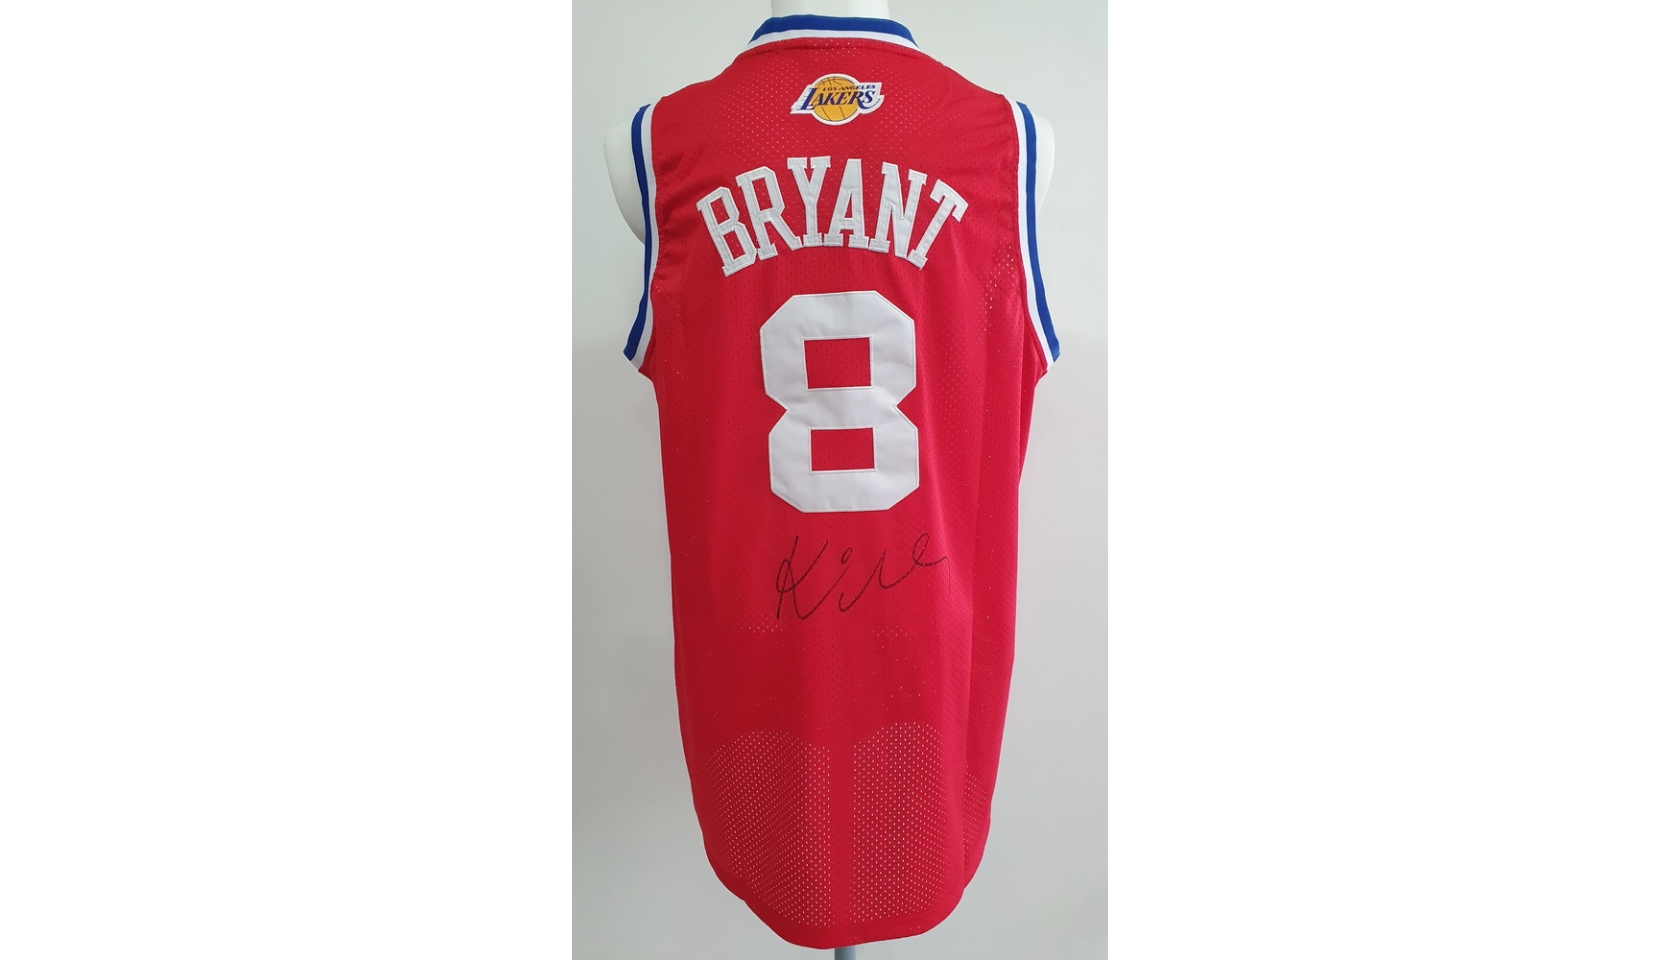 Kobe Bryant - Signed All Star jersey, vicdemo23